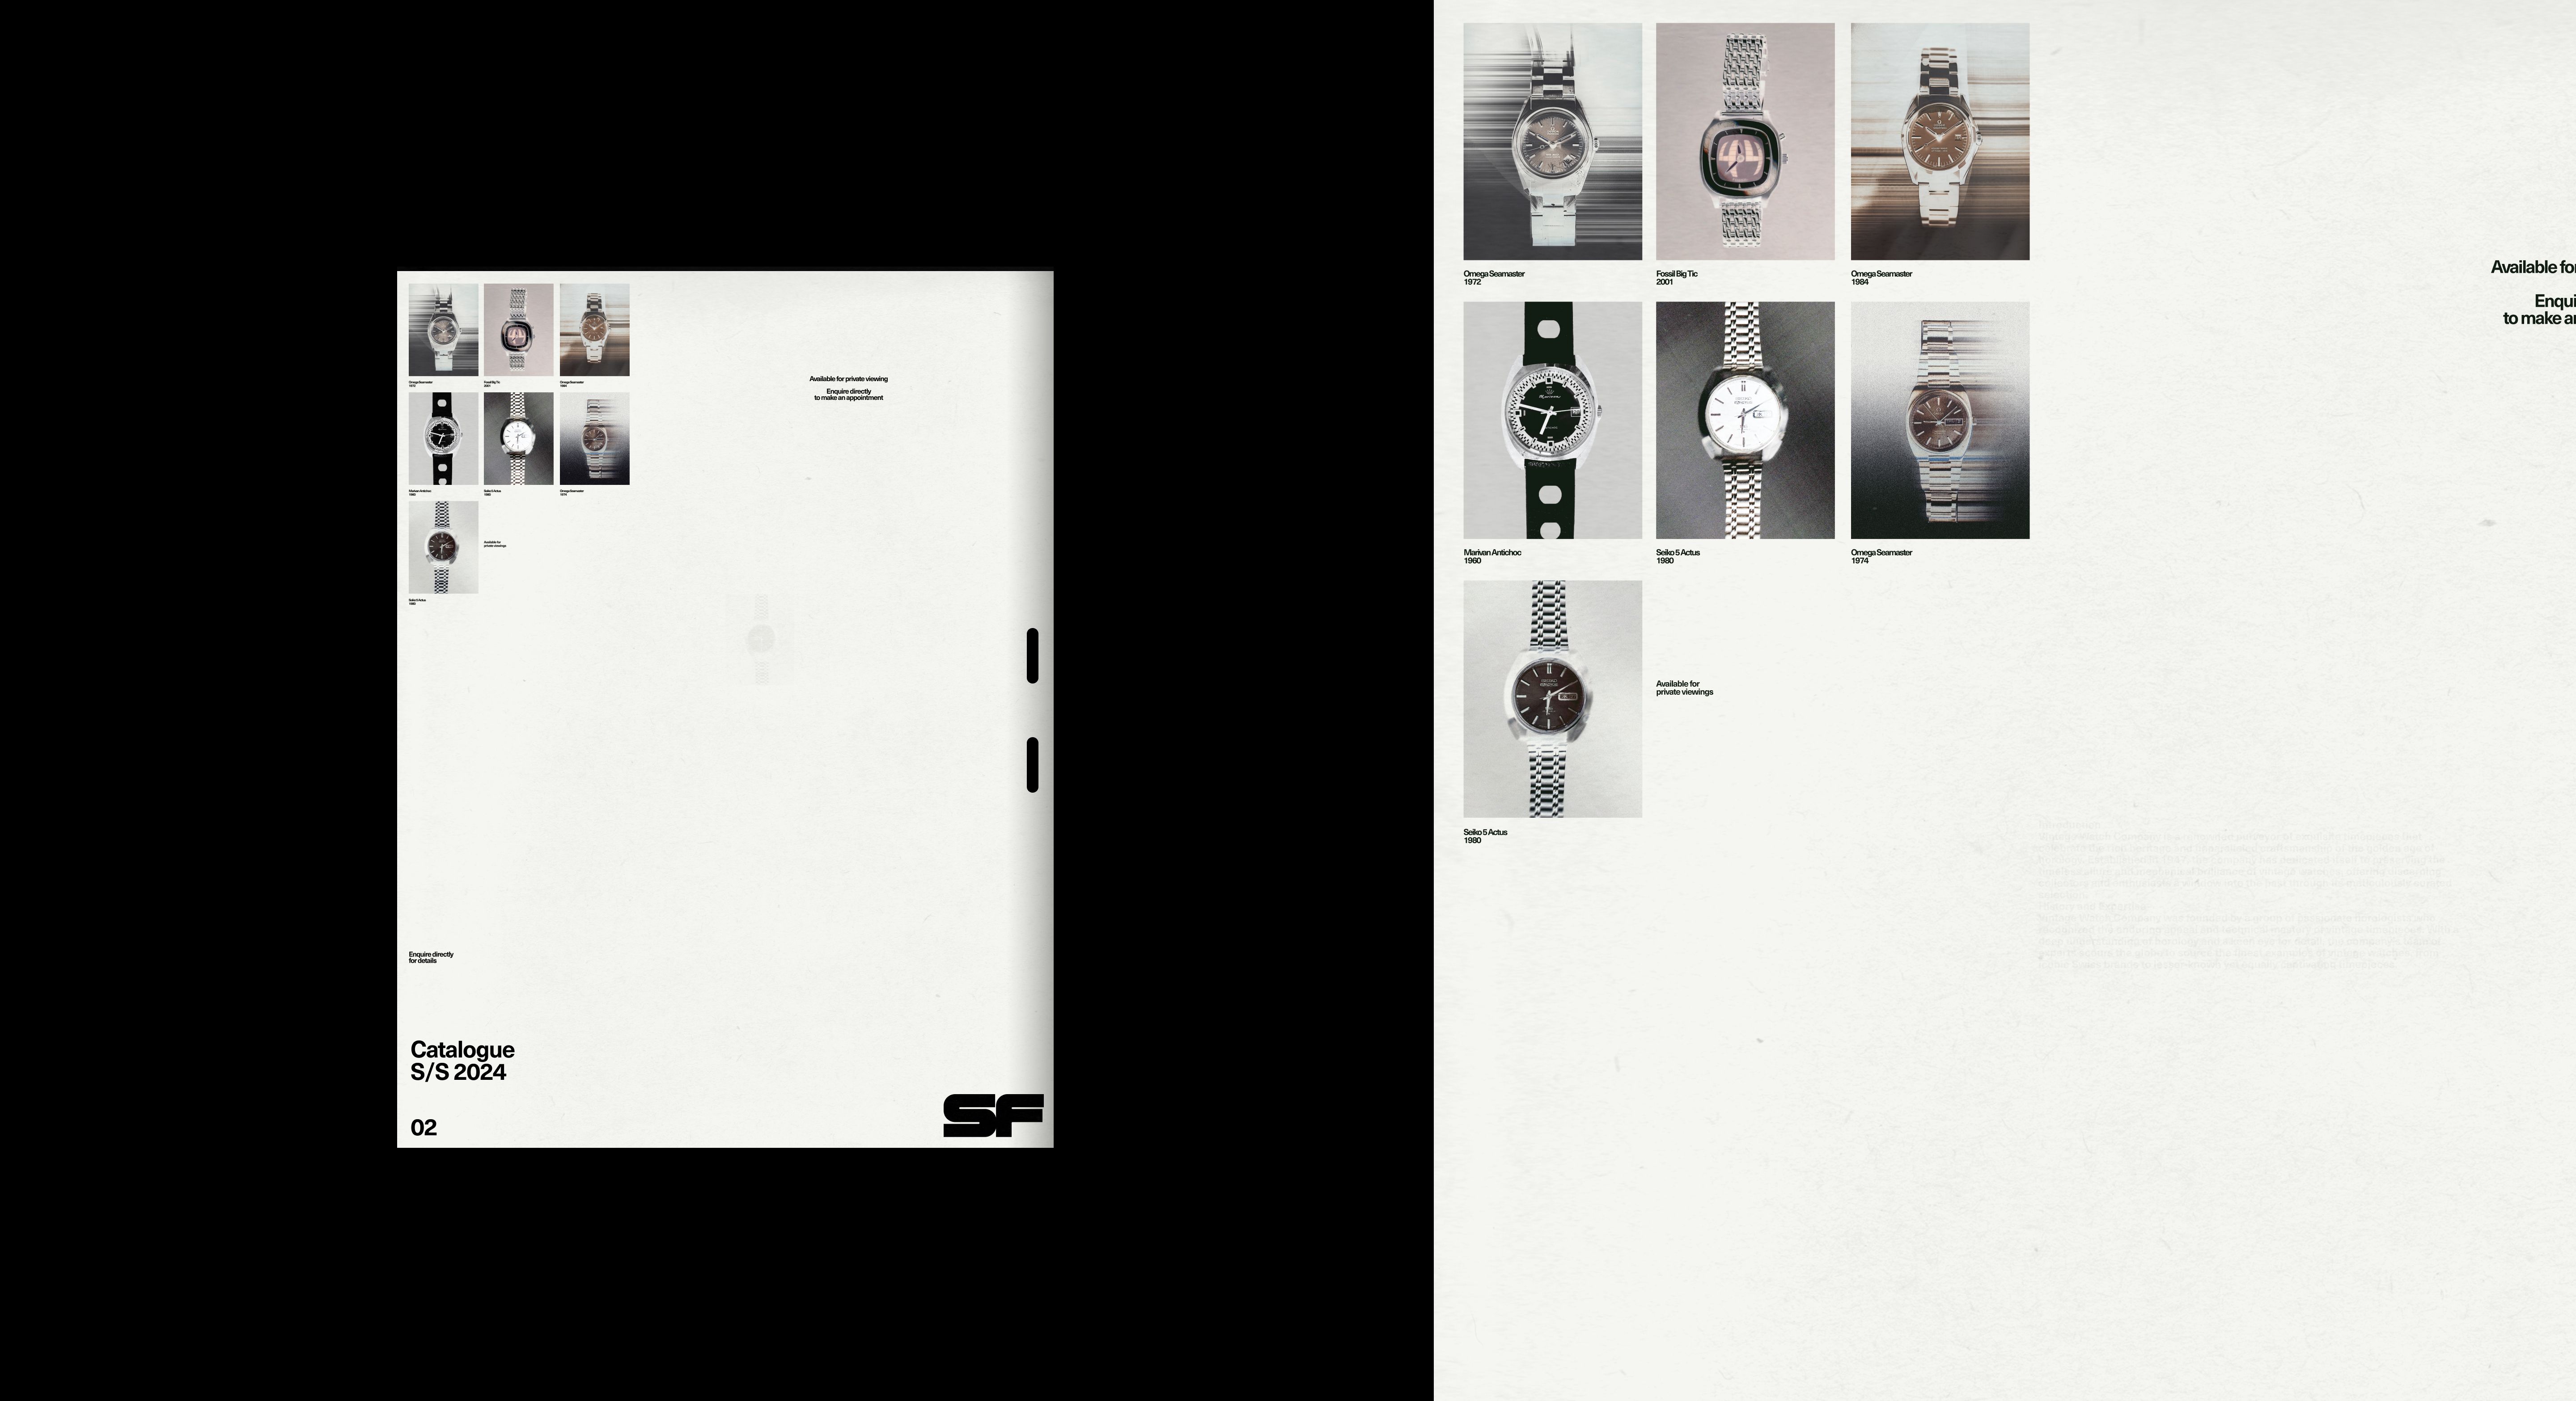 Saveface catalogue by After Hours Studio